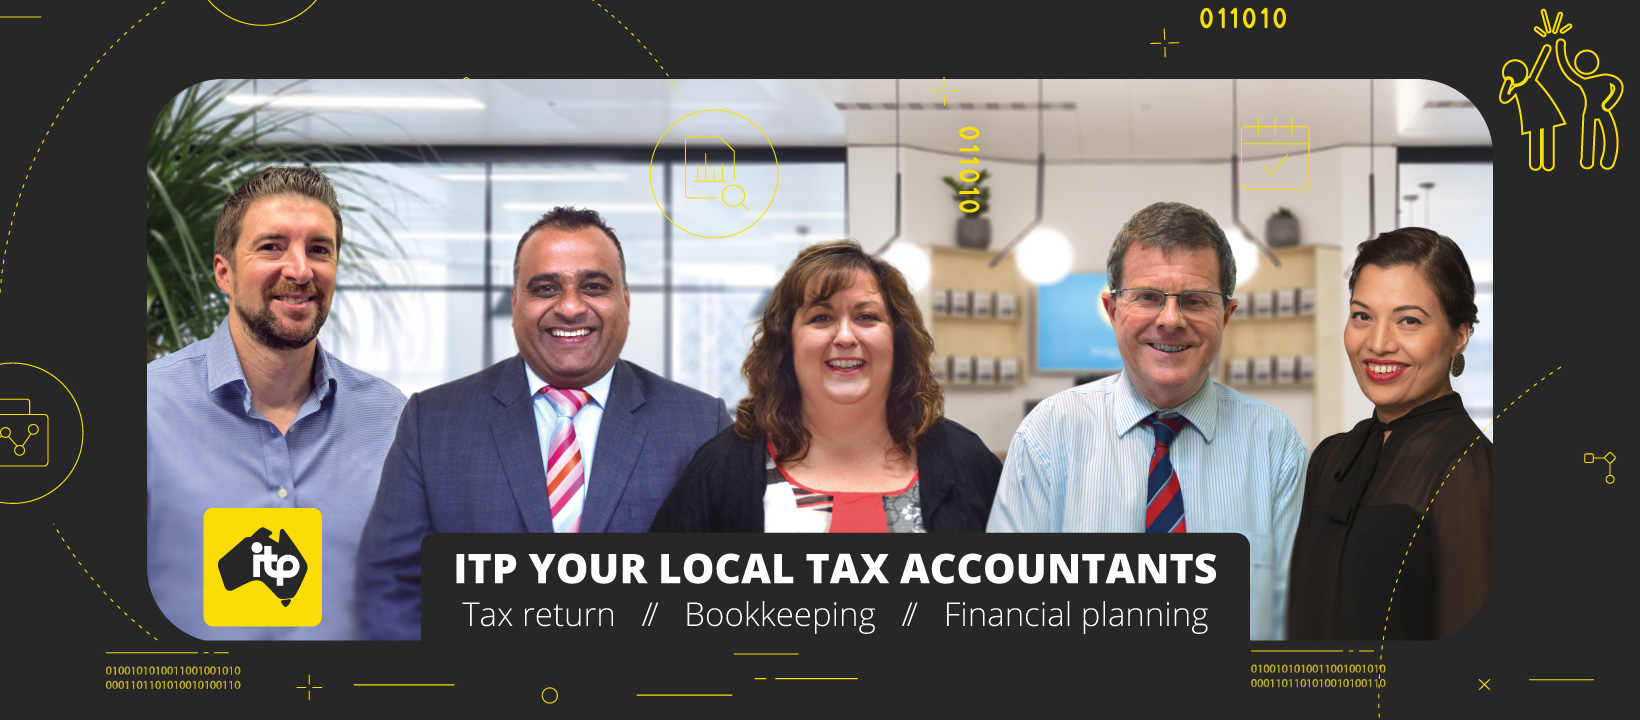 ITP Accounting Professionals South Hedland